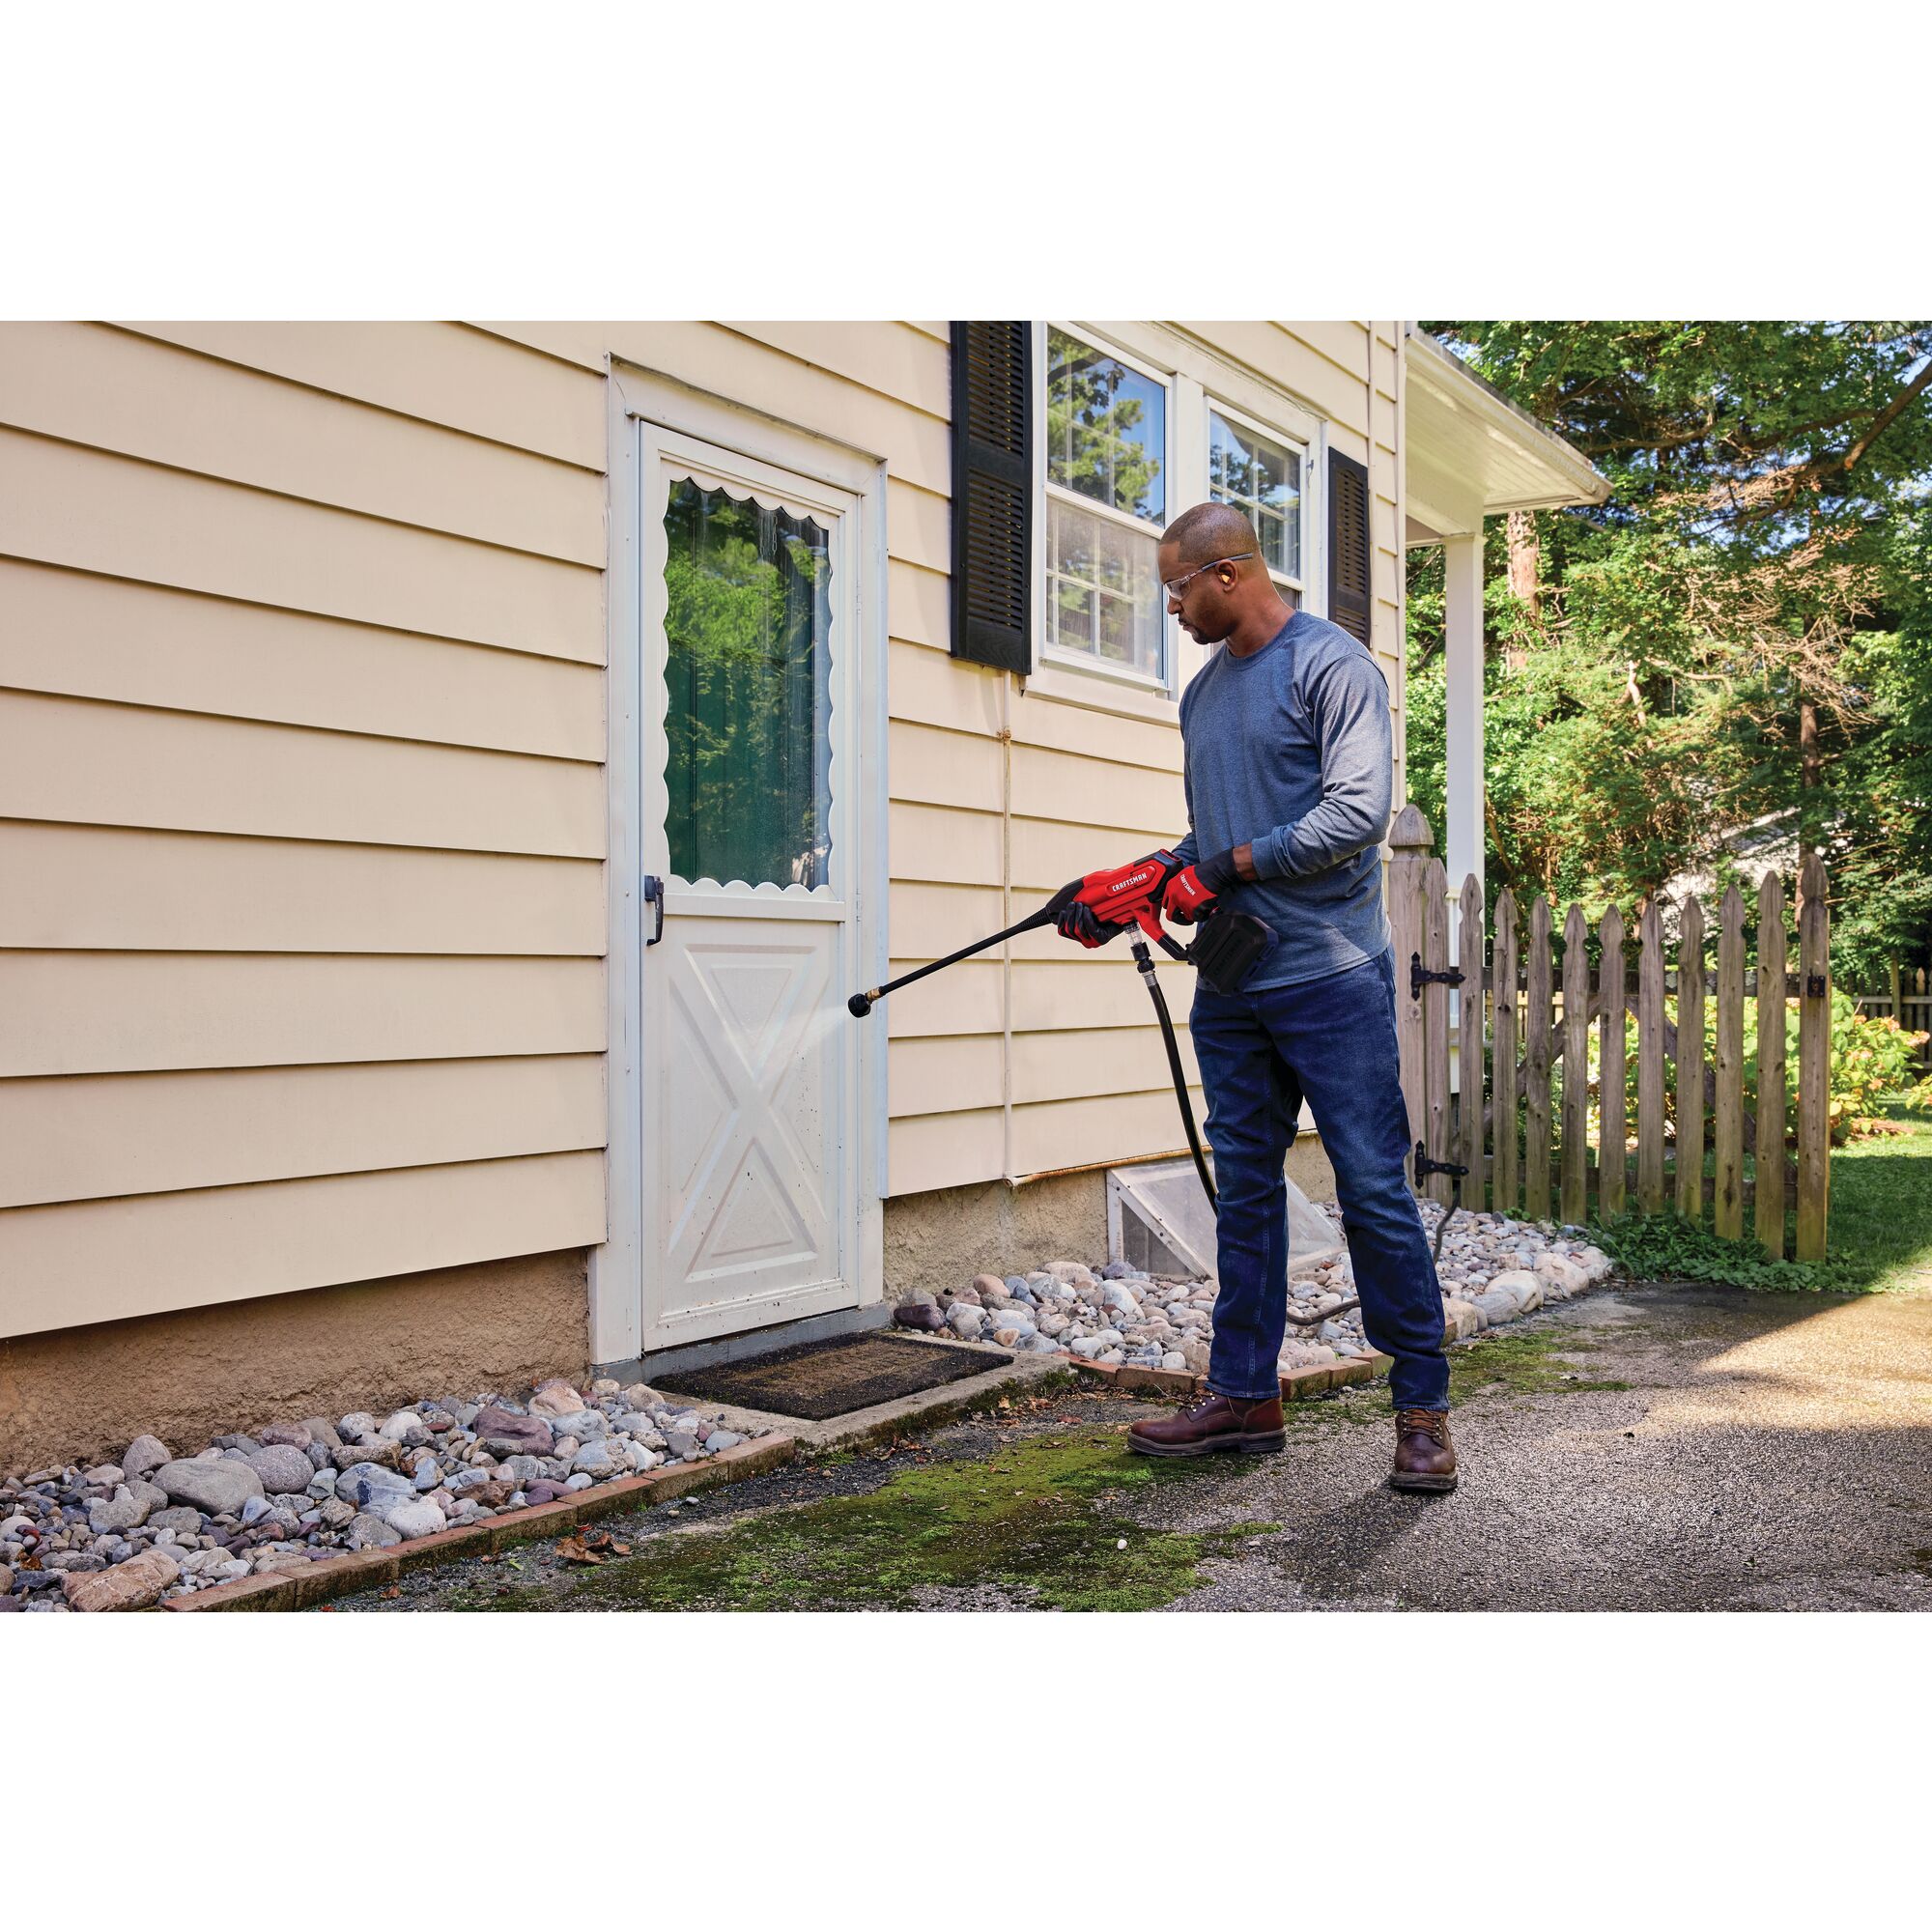 20 volt cordless 350 max P S I power cleaner being used by a person to clean a door outdoors.